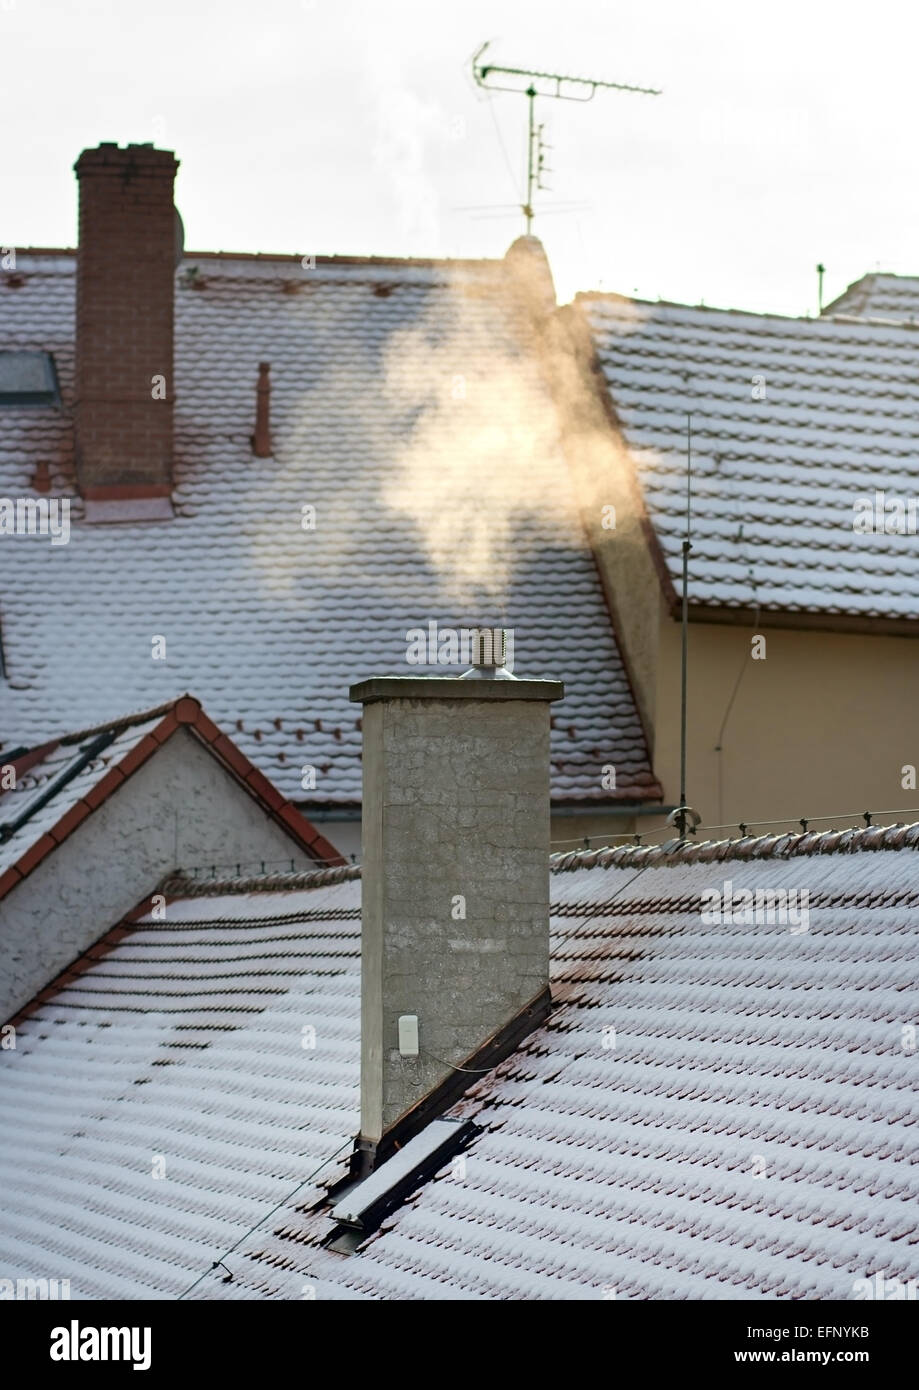 Smoke rising from the chimney in winter city Stock Photo